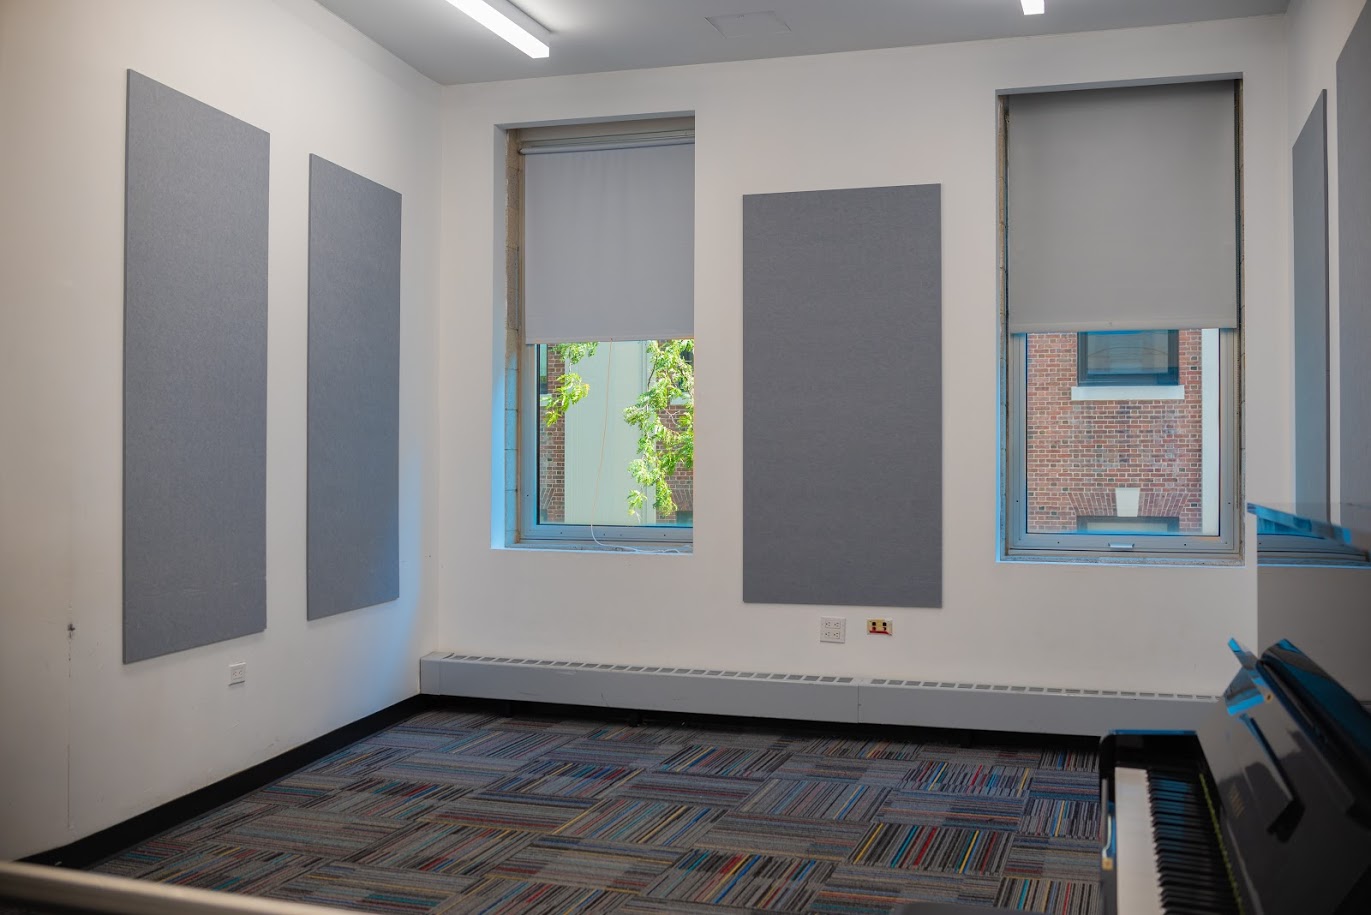 Grey acoustic panels line a white-walled room. A black piano is pushed against one wall.